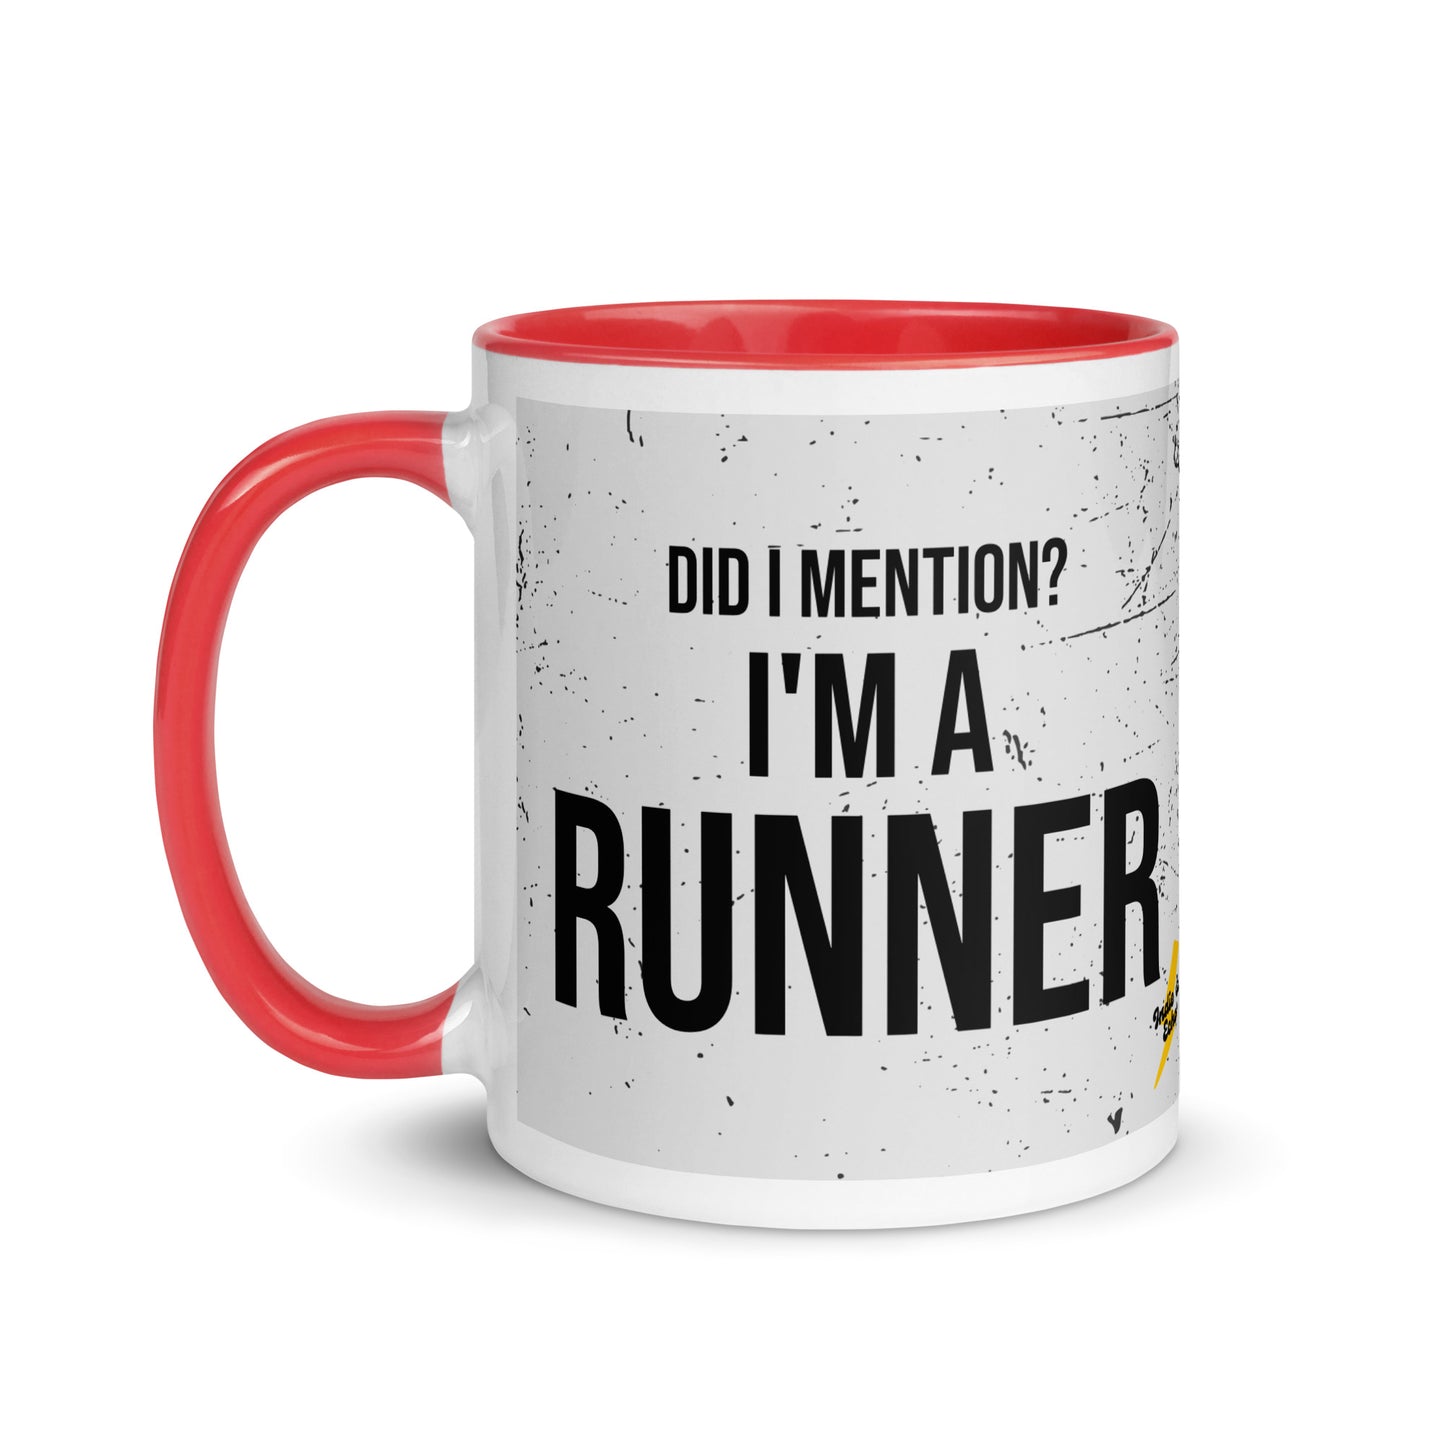 Mug with red handle and a grey splatter print design with the phrase did I mention? I'm a runner across the front. A nice gift for a running friend. 